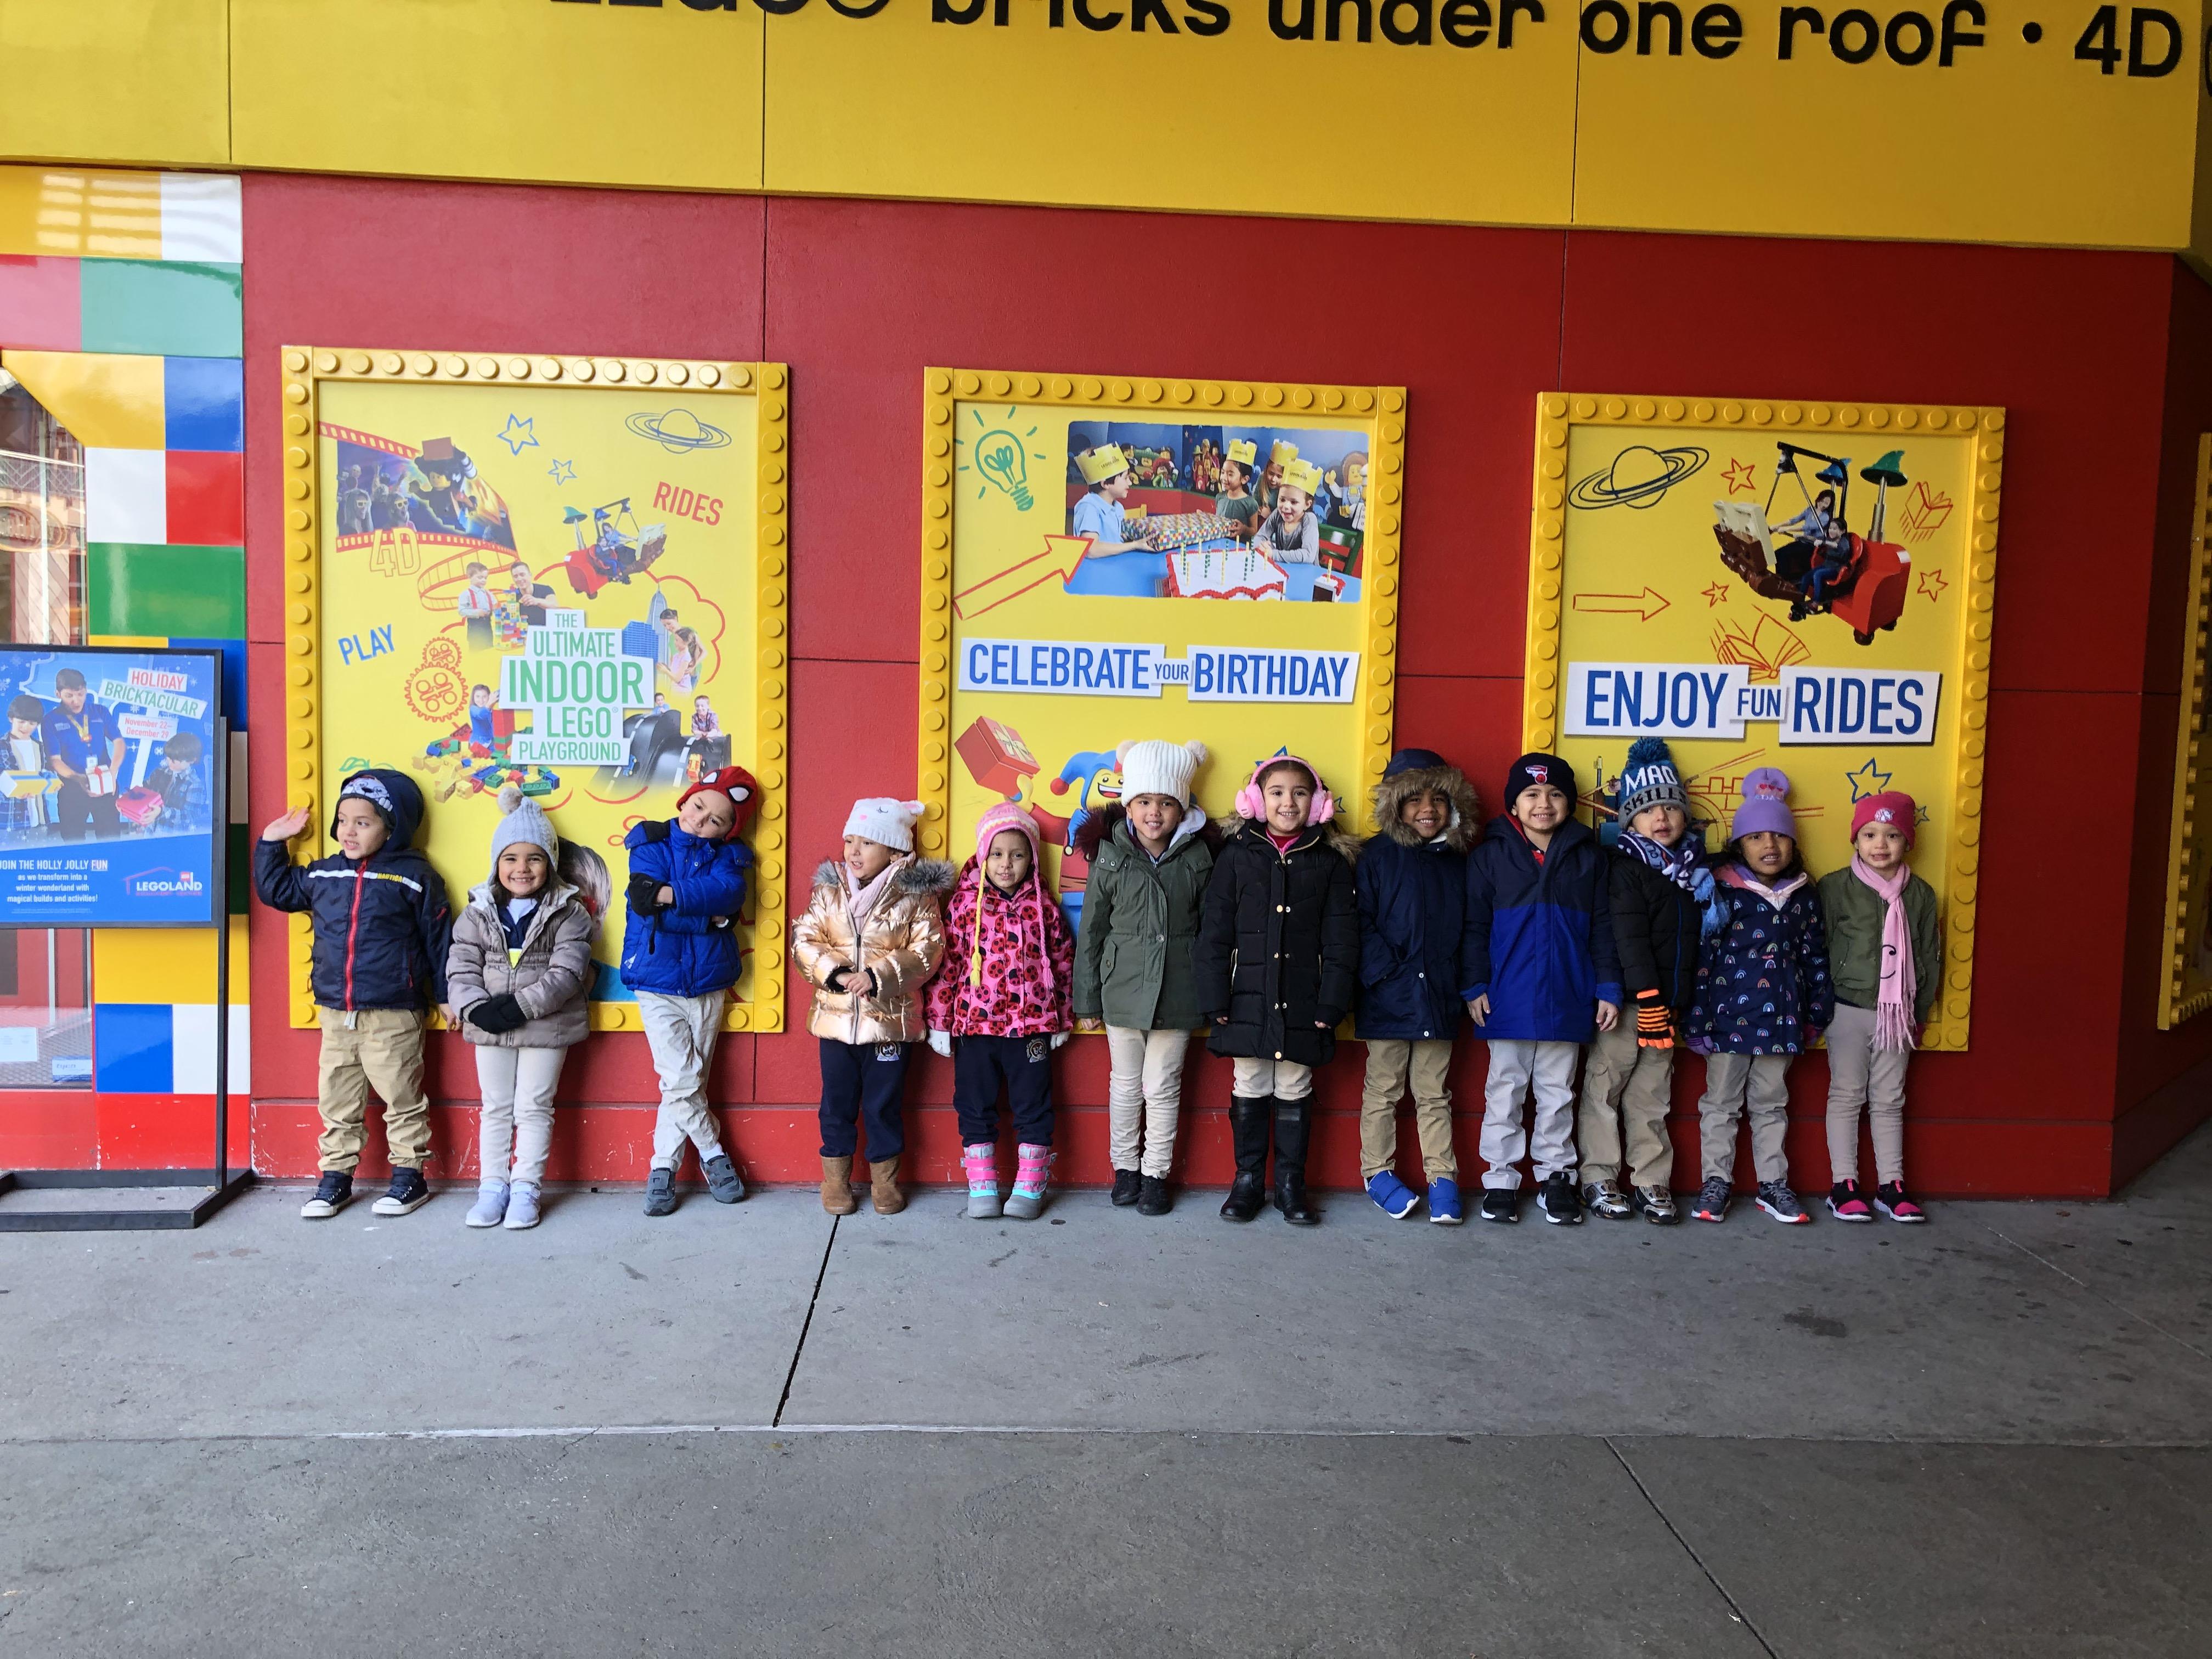 the children standing against the entryway of the legoland in casual poses